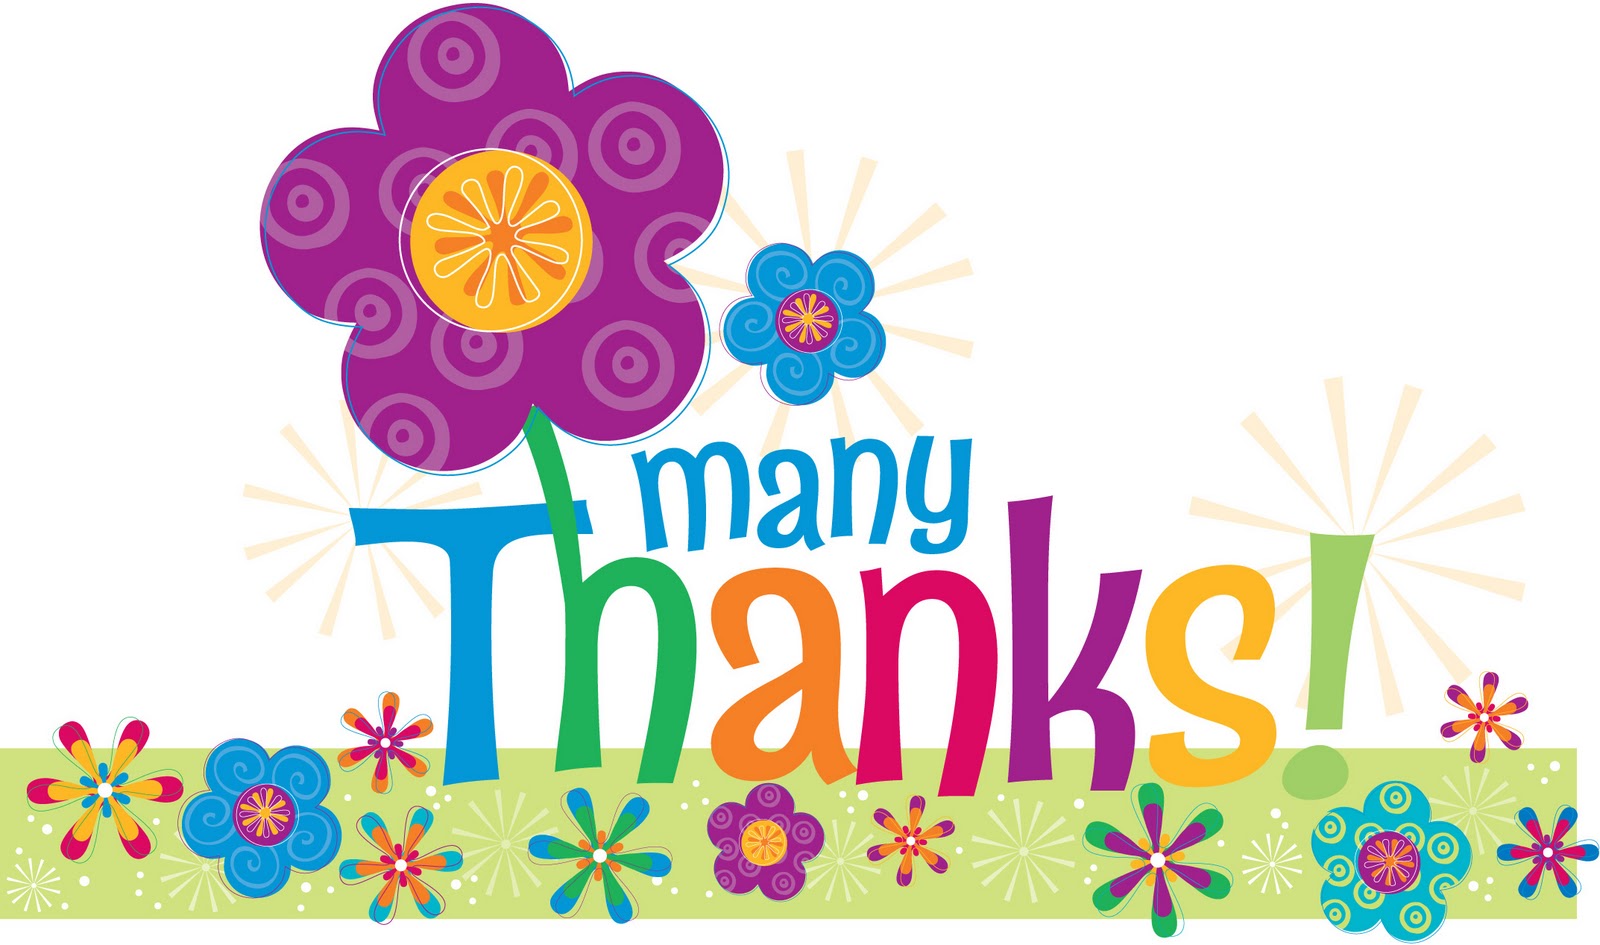 thank you clipart free animated - photo #26